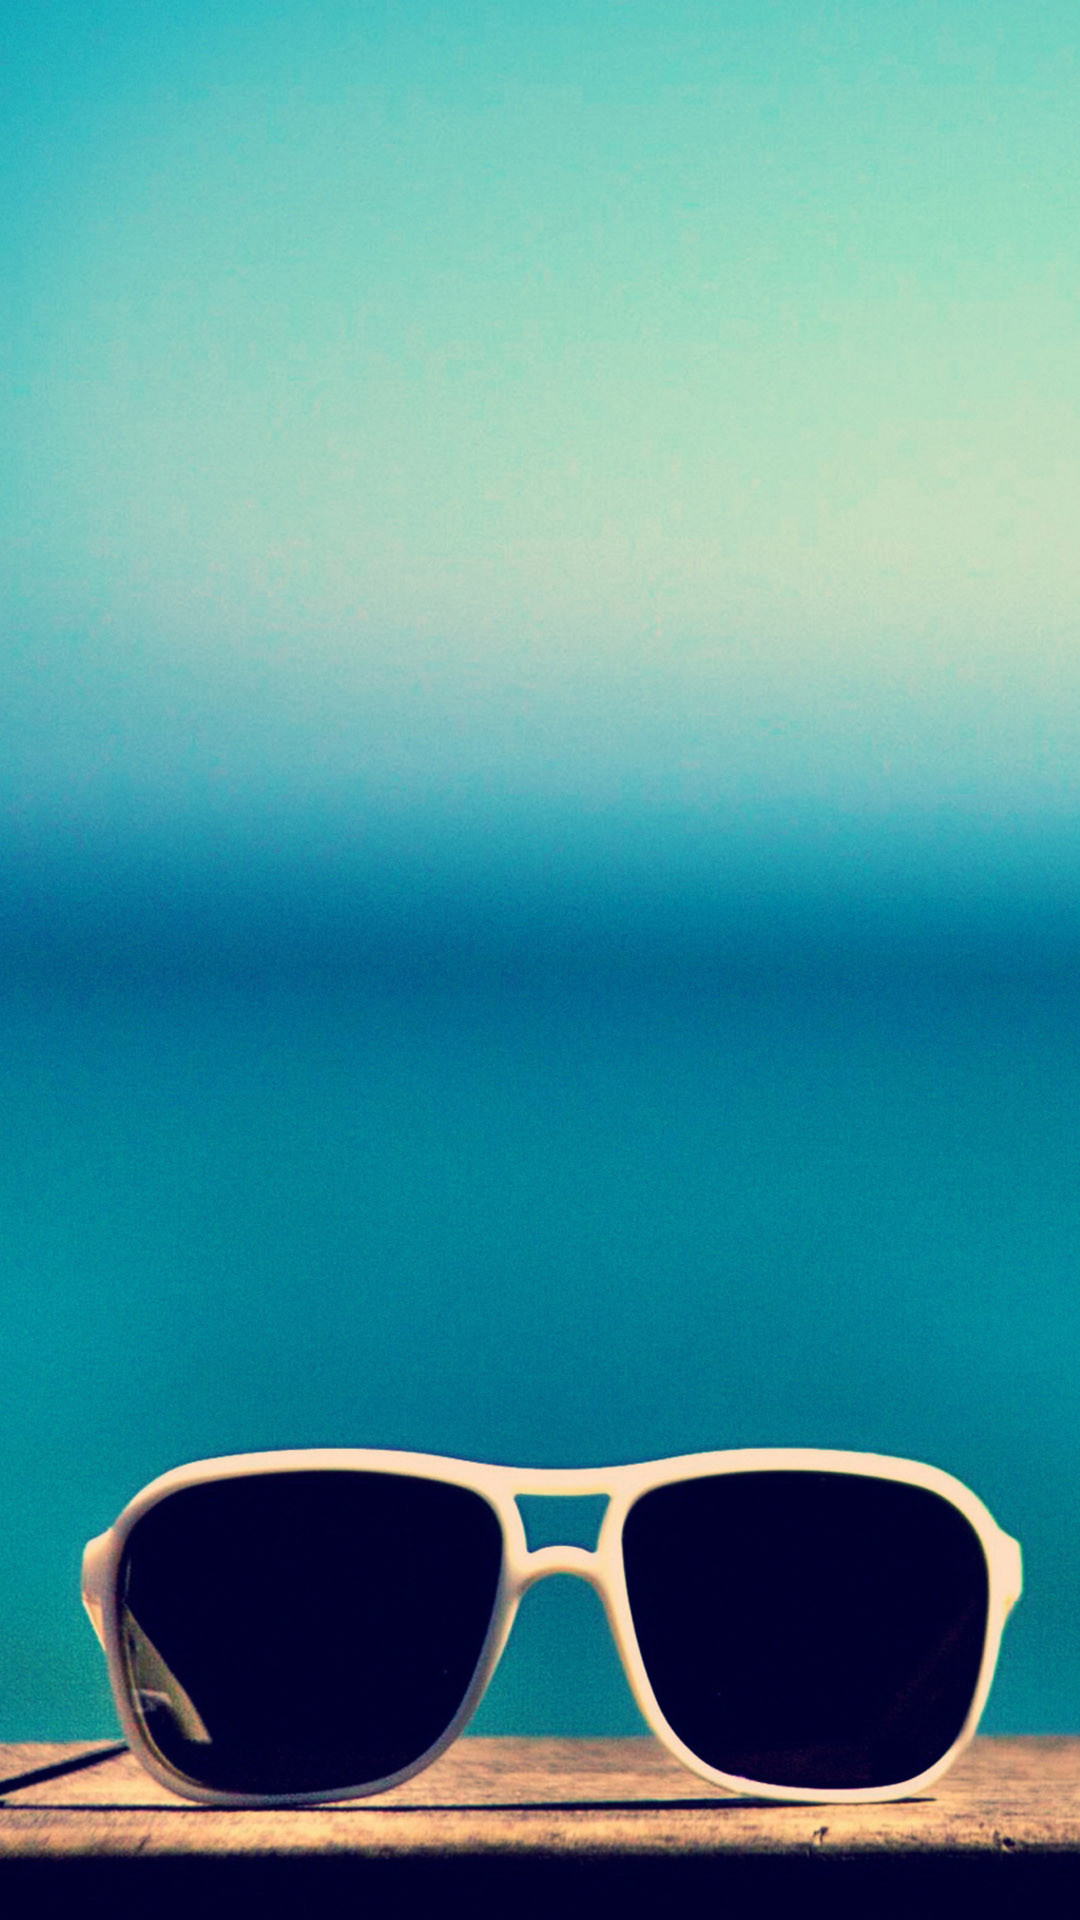 1080x1920 Cool Hipster Sunglasses Android Wallpaper